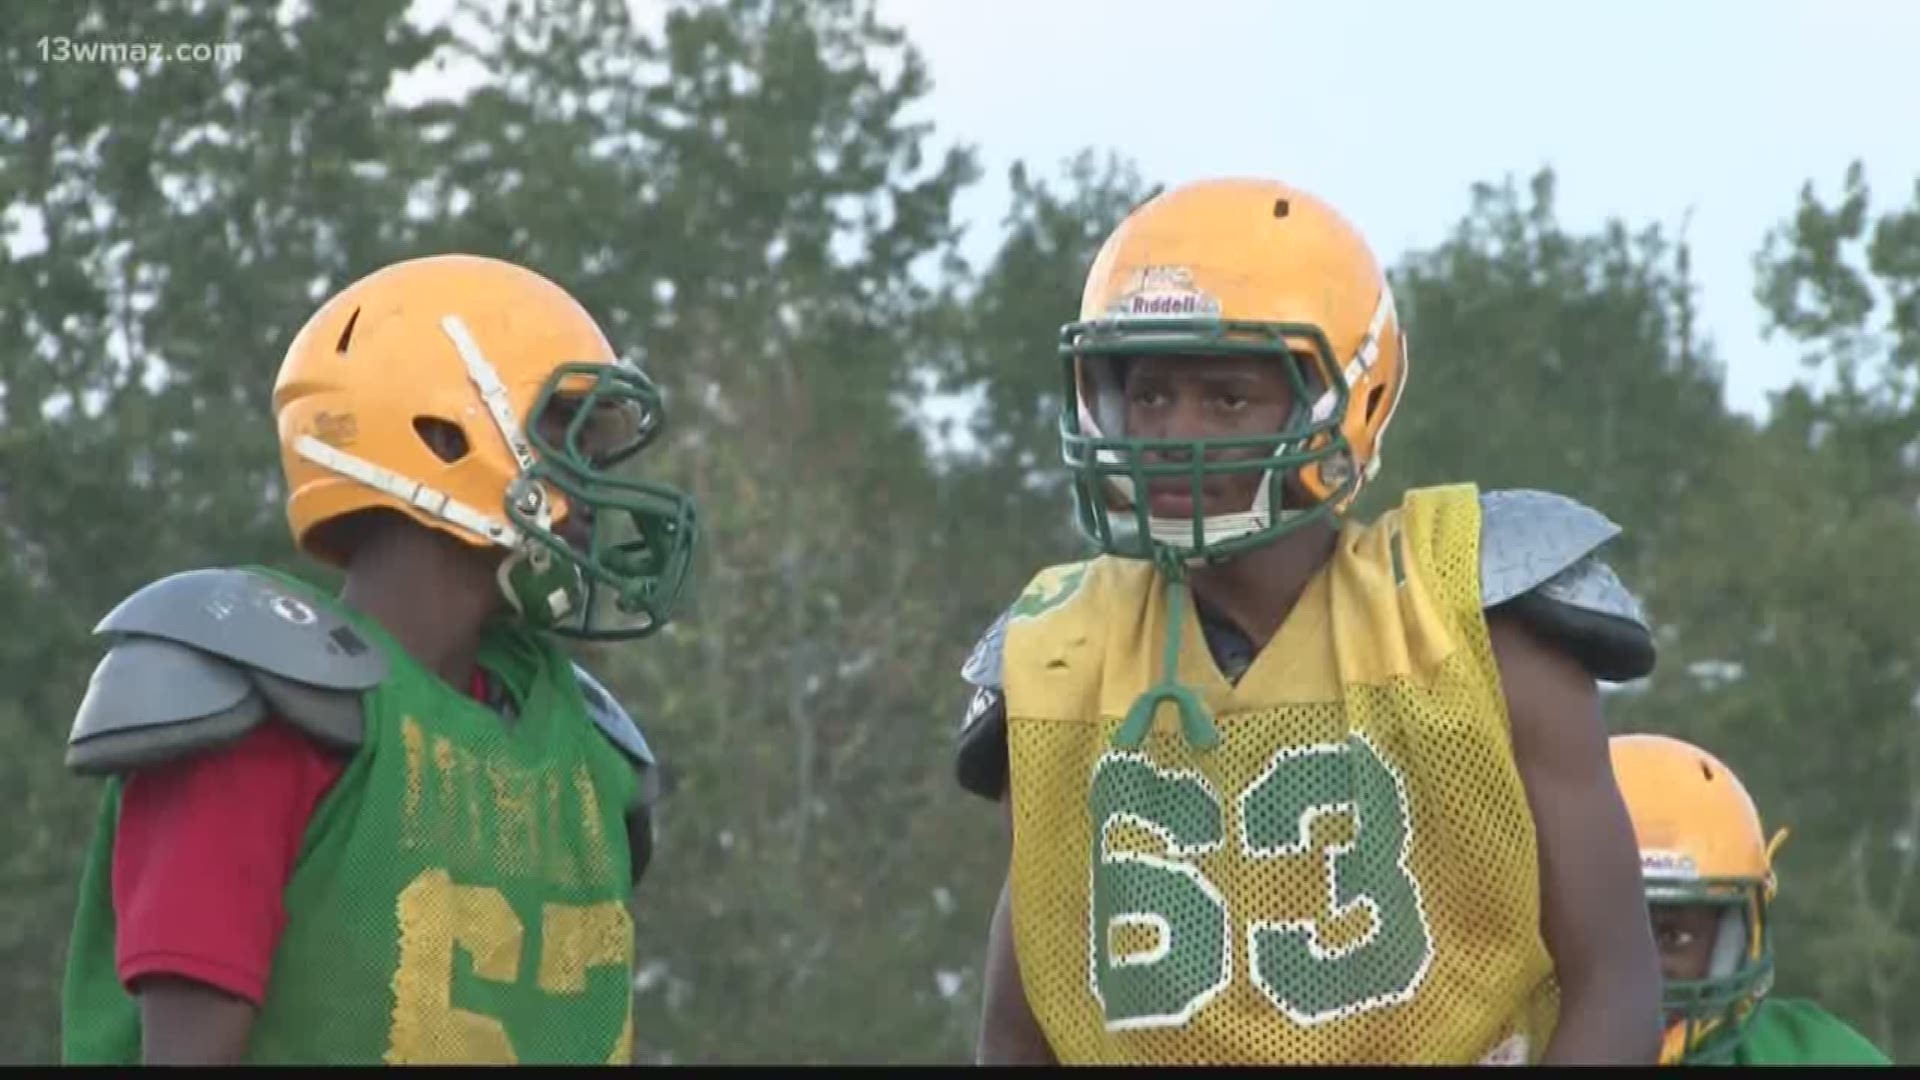 Dublin High School football will have plenty of talent coming into the program next year, including two youngsters who are hearing-impaired.